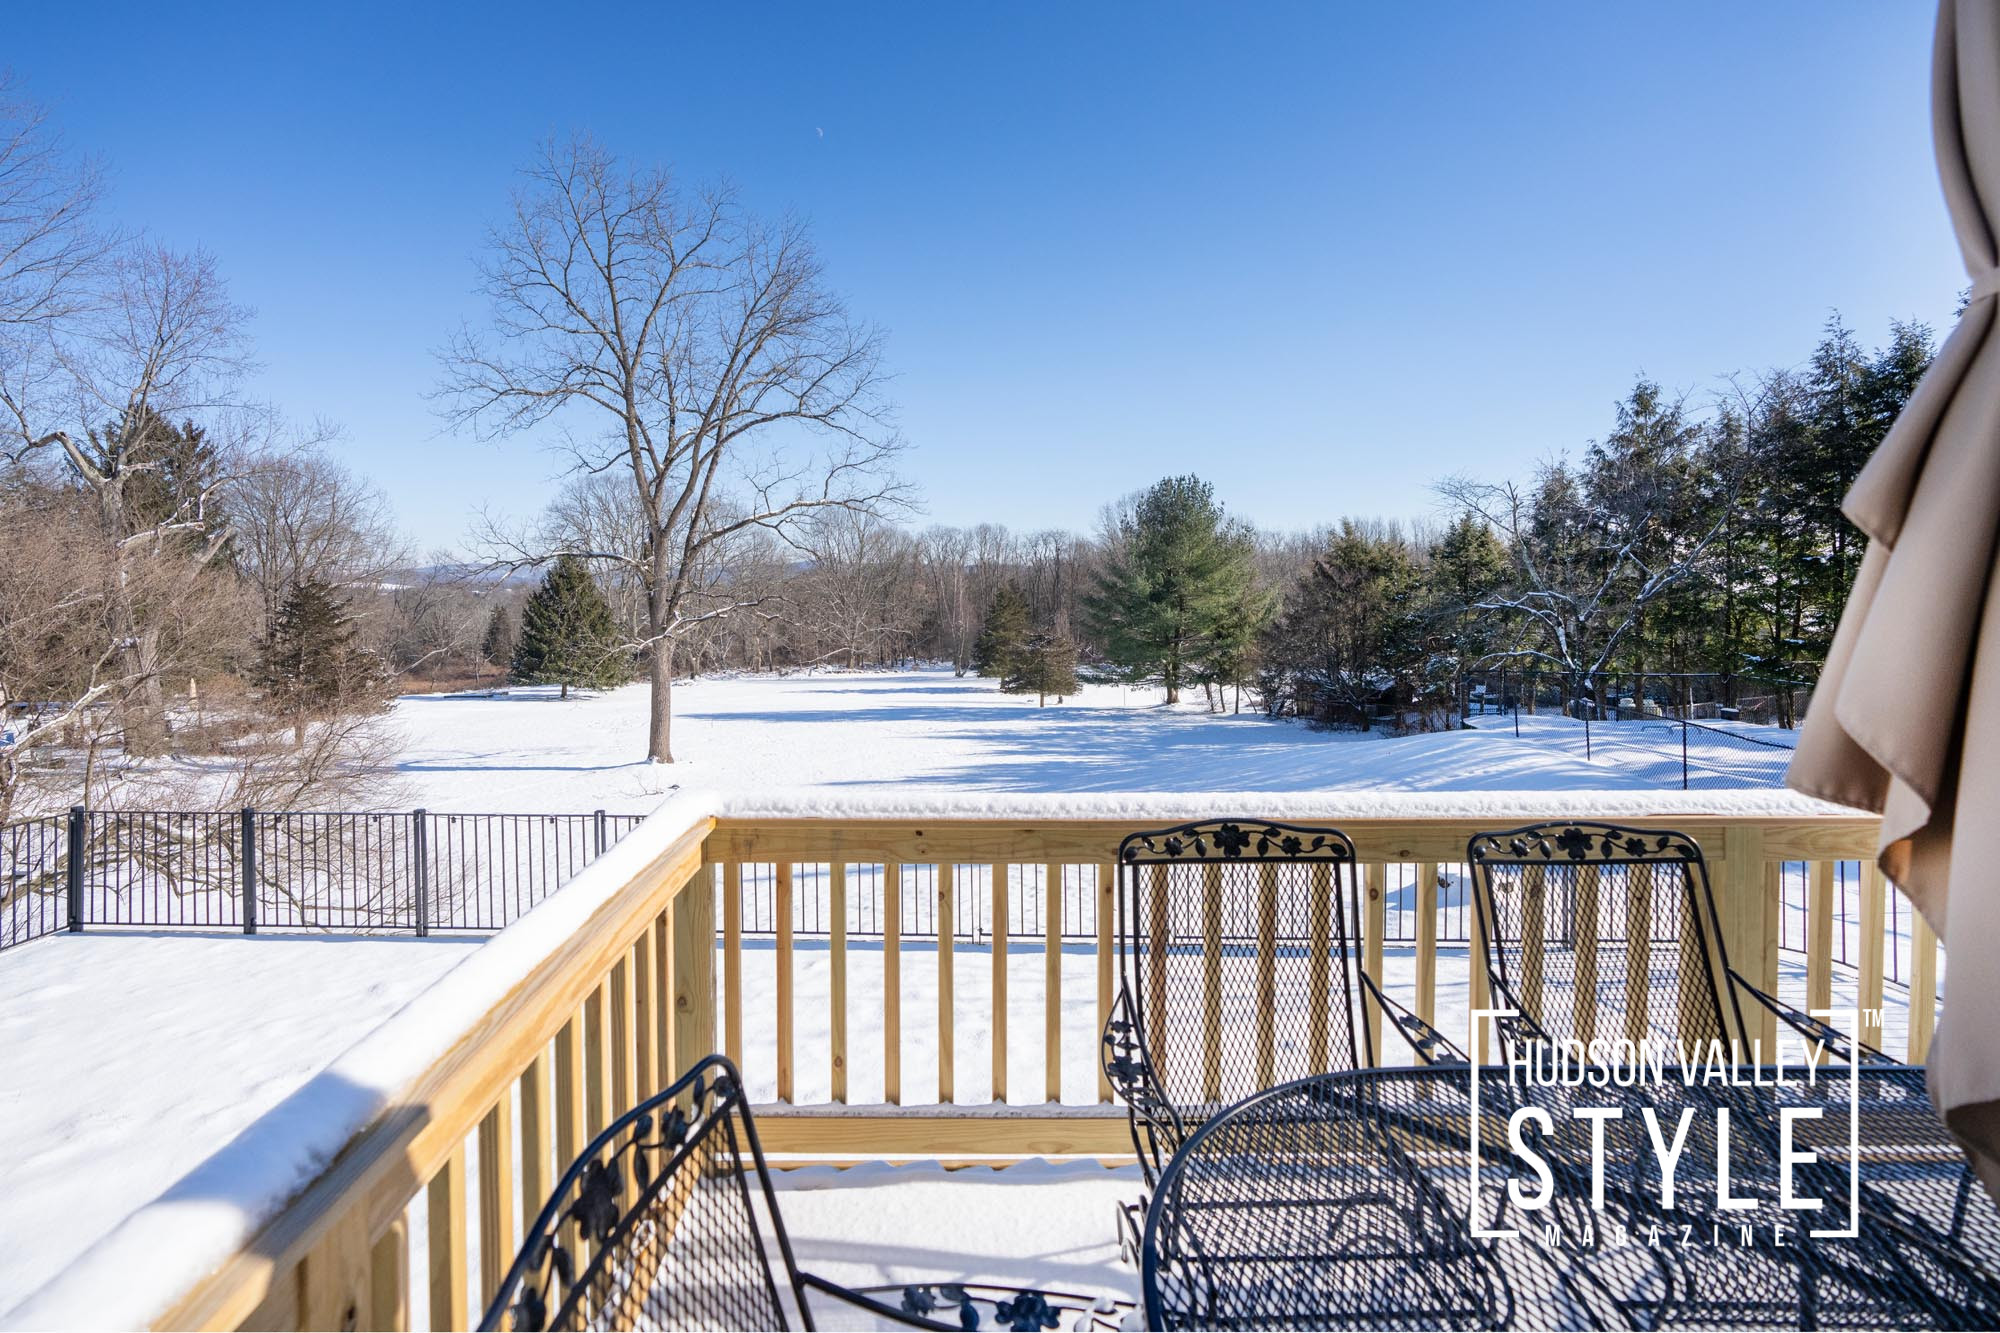 Hudson Valley Winter Ski Trip Awaits: Conquer Mount Peter in Warwick and Cozy Up in Monroe, NY Airbnb – Presented by Alluvion Vacations